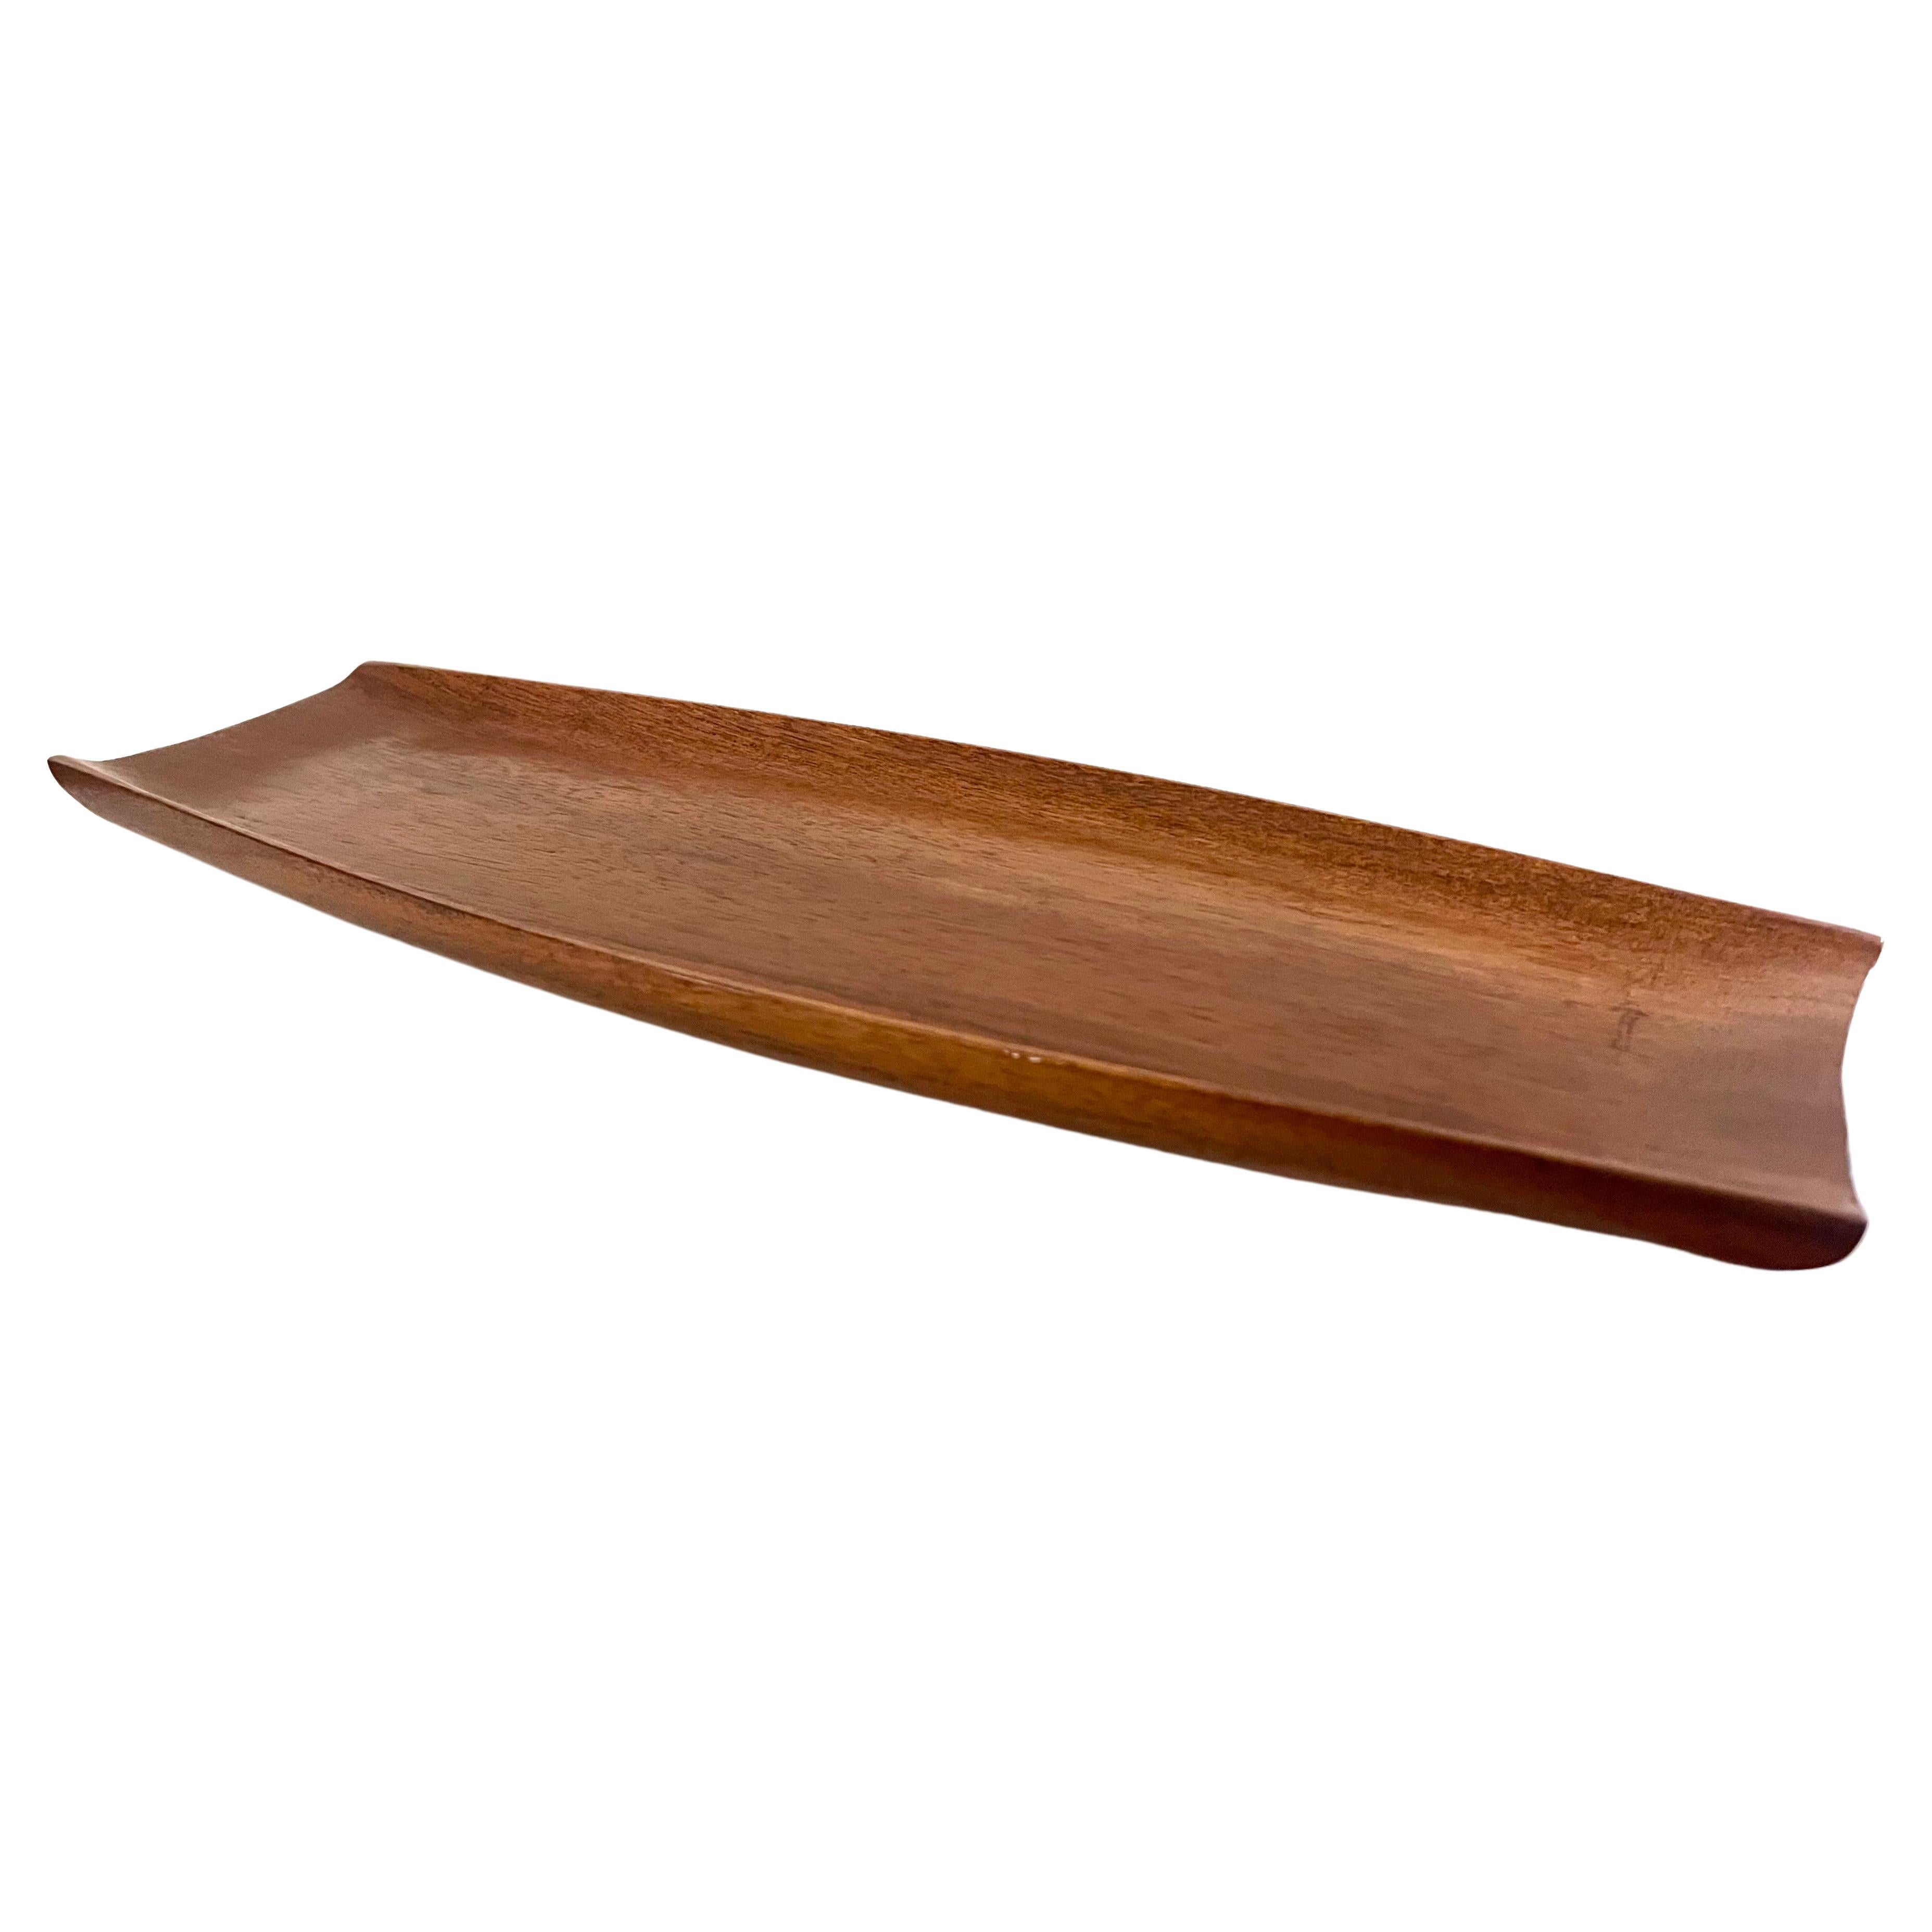 Beautiful shape and form on this solid teak hand-carved tray, nice raised edge, and very nice condition, great for Catch it all use or fruit bowl.